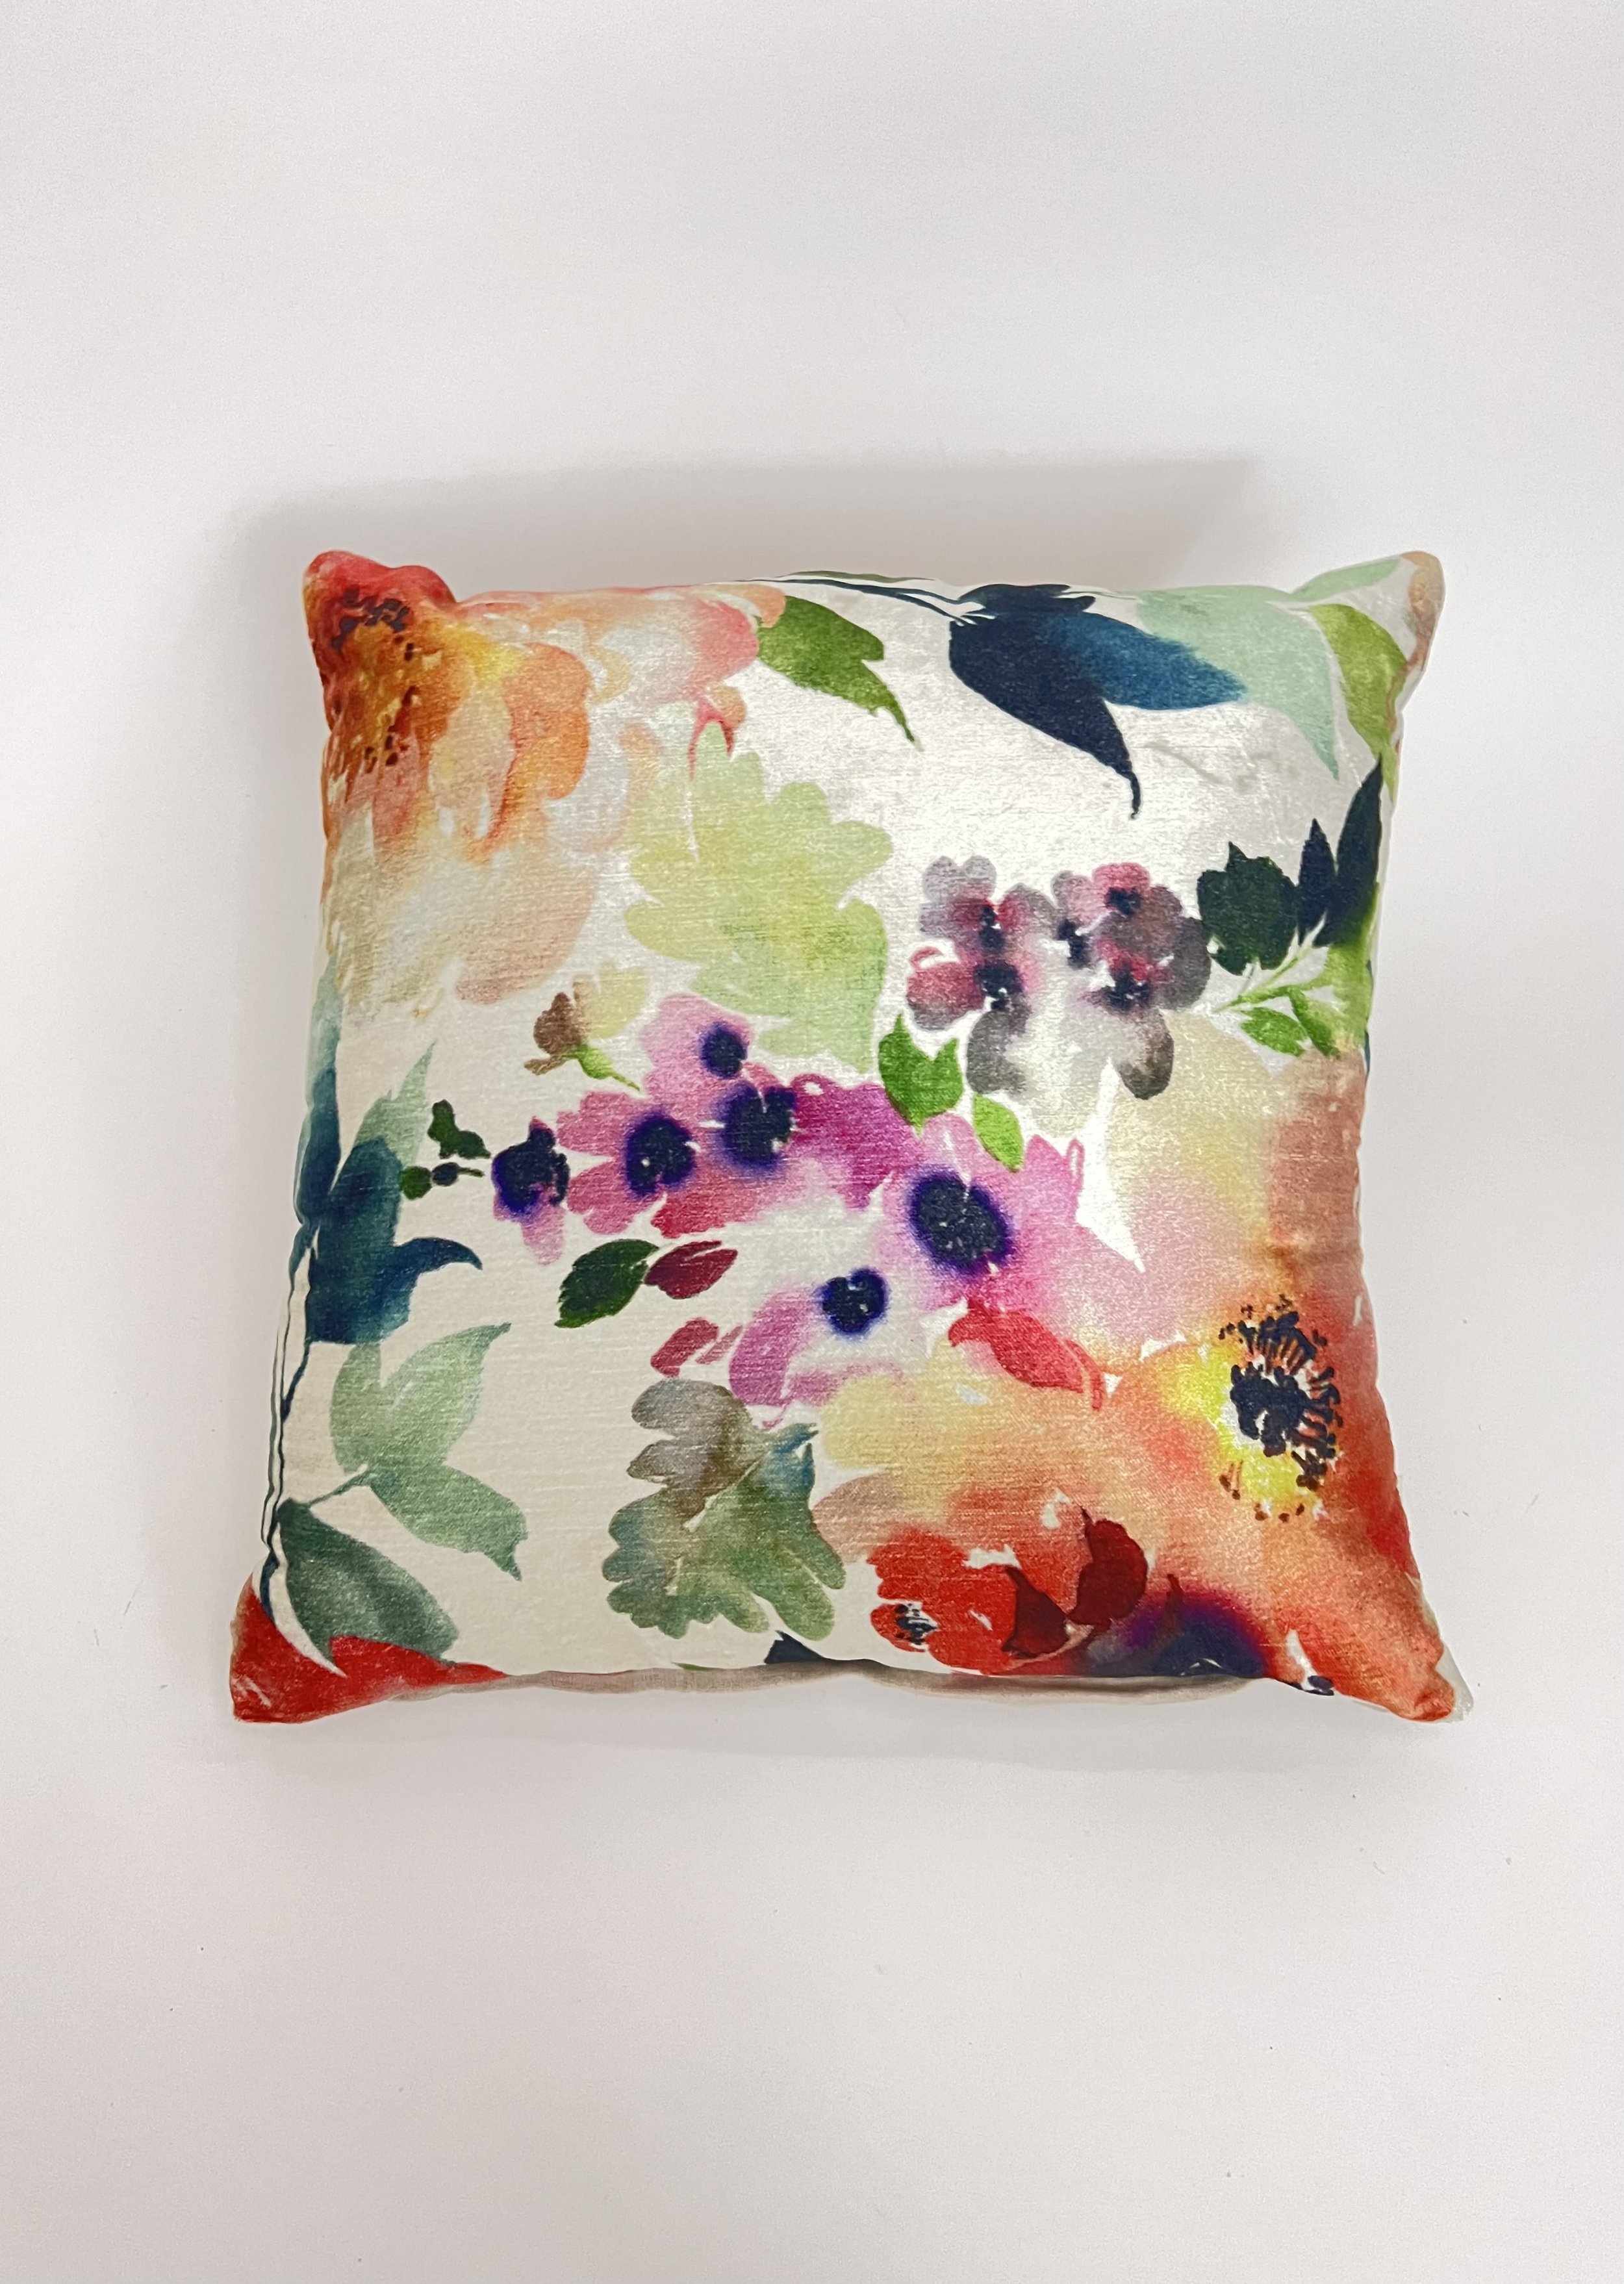 Style #2 Floral Pillows